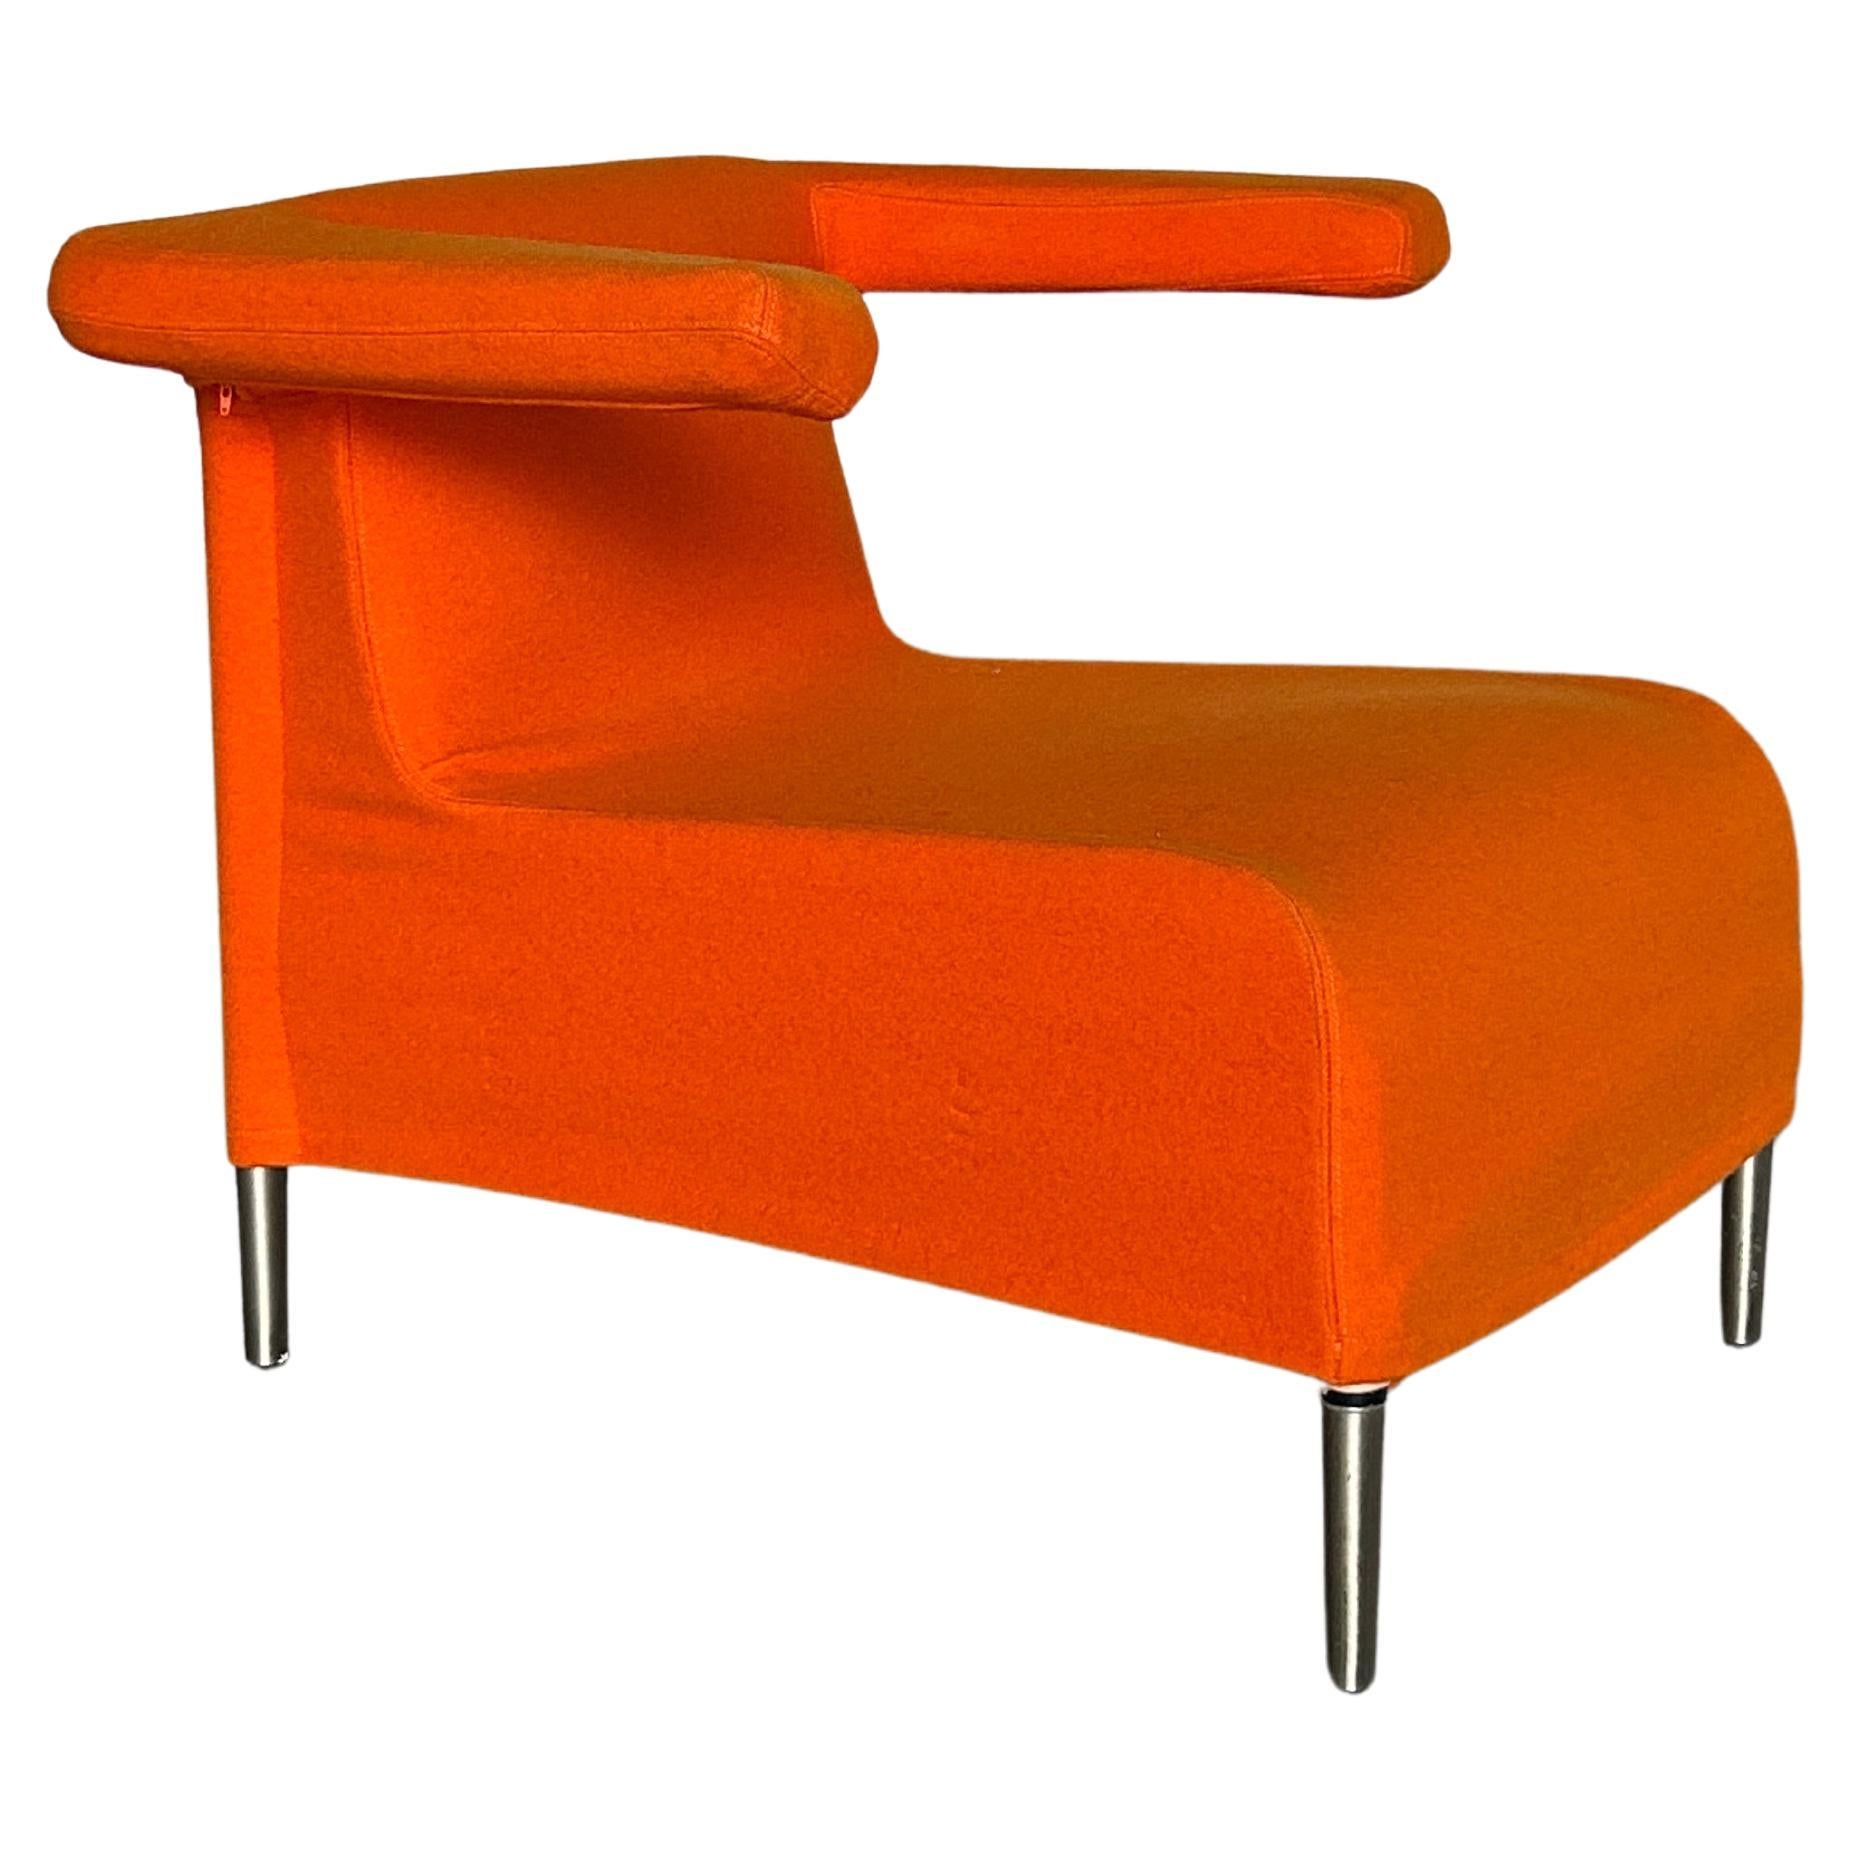 Lievore Altherr Molina Armchairs